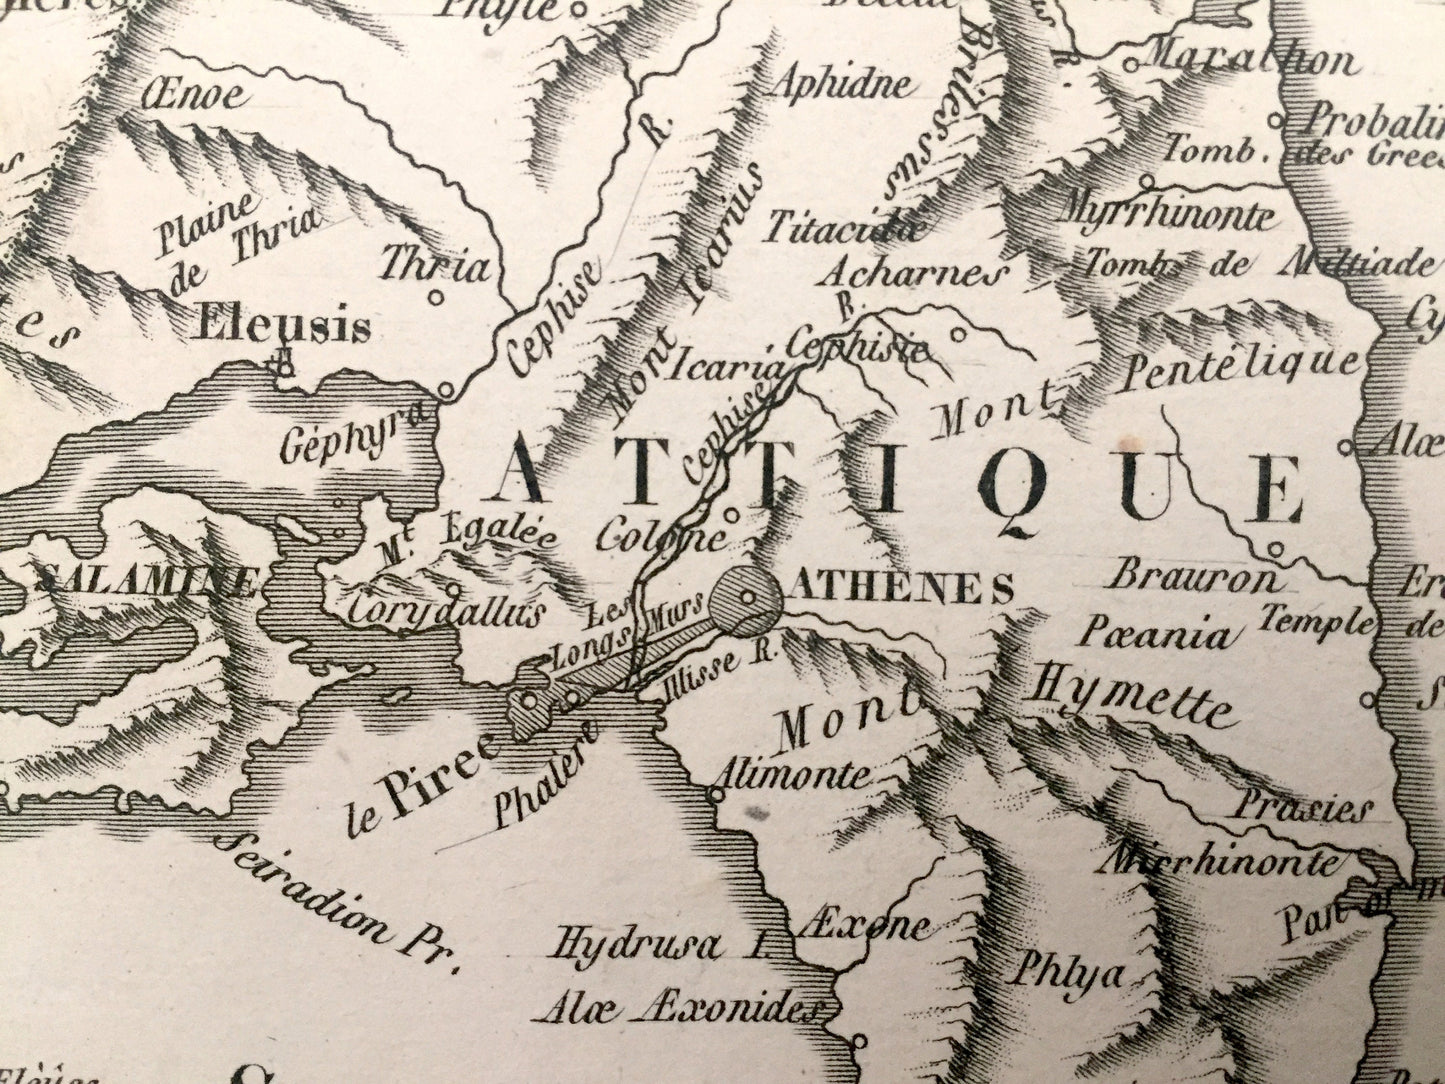 Antique 1821 Greece Map from Atlas from Barthélemy's Voyage of Anacharsis by Barbie du Bocage  – Athens, Cyclades Islands, Corinthia, Kea